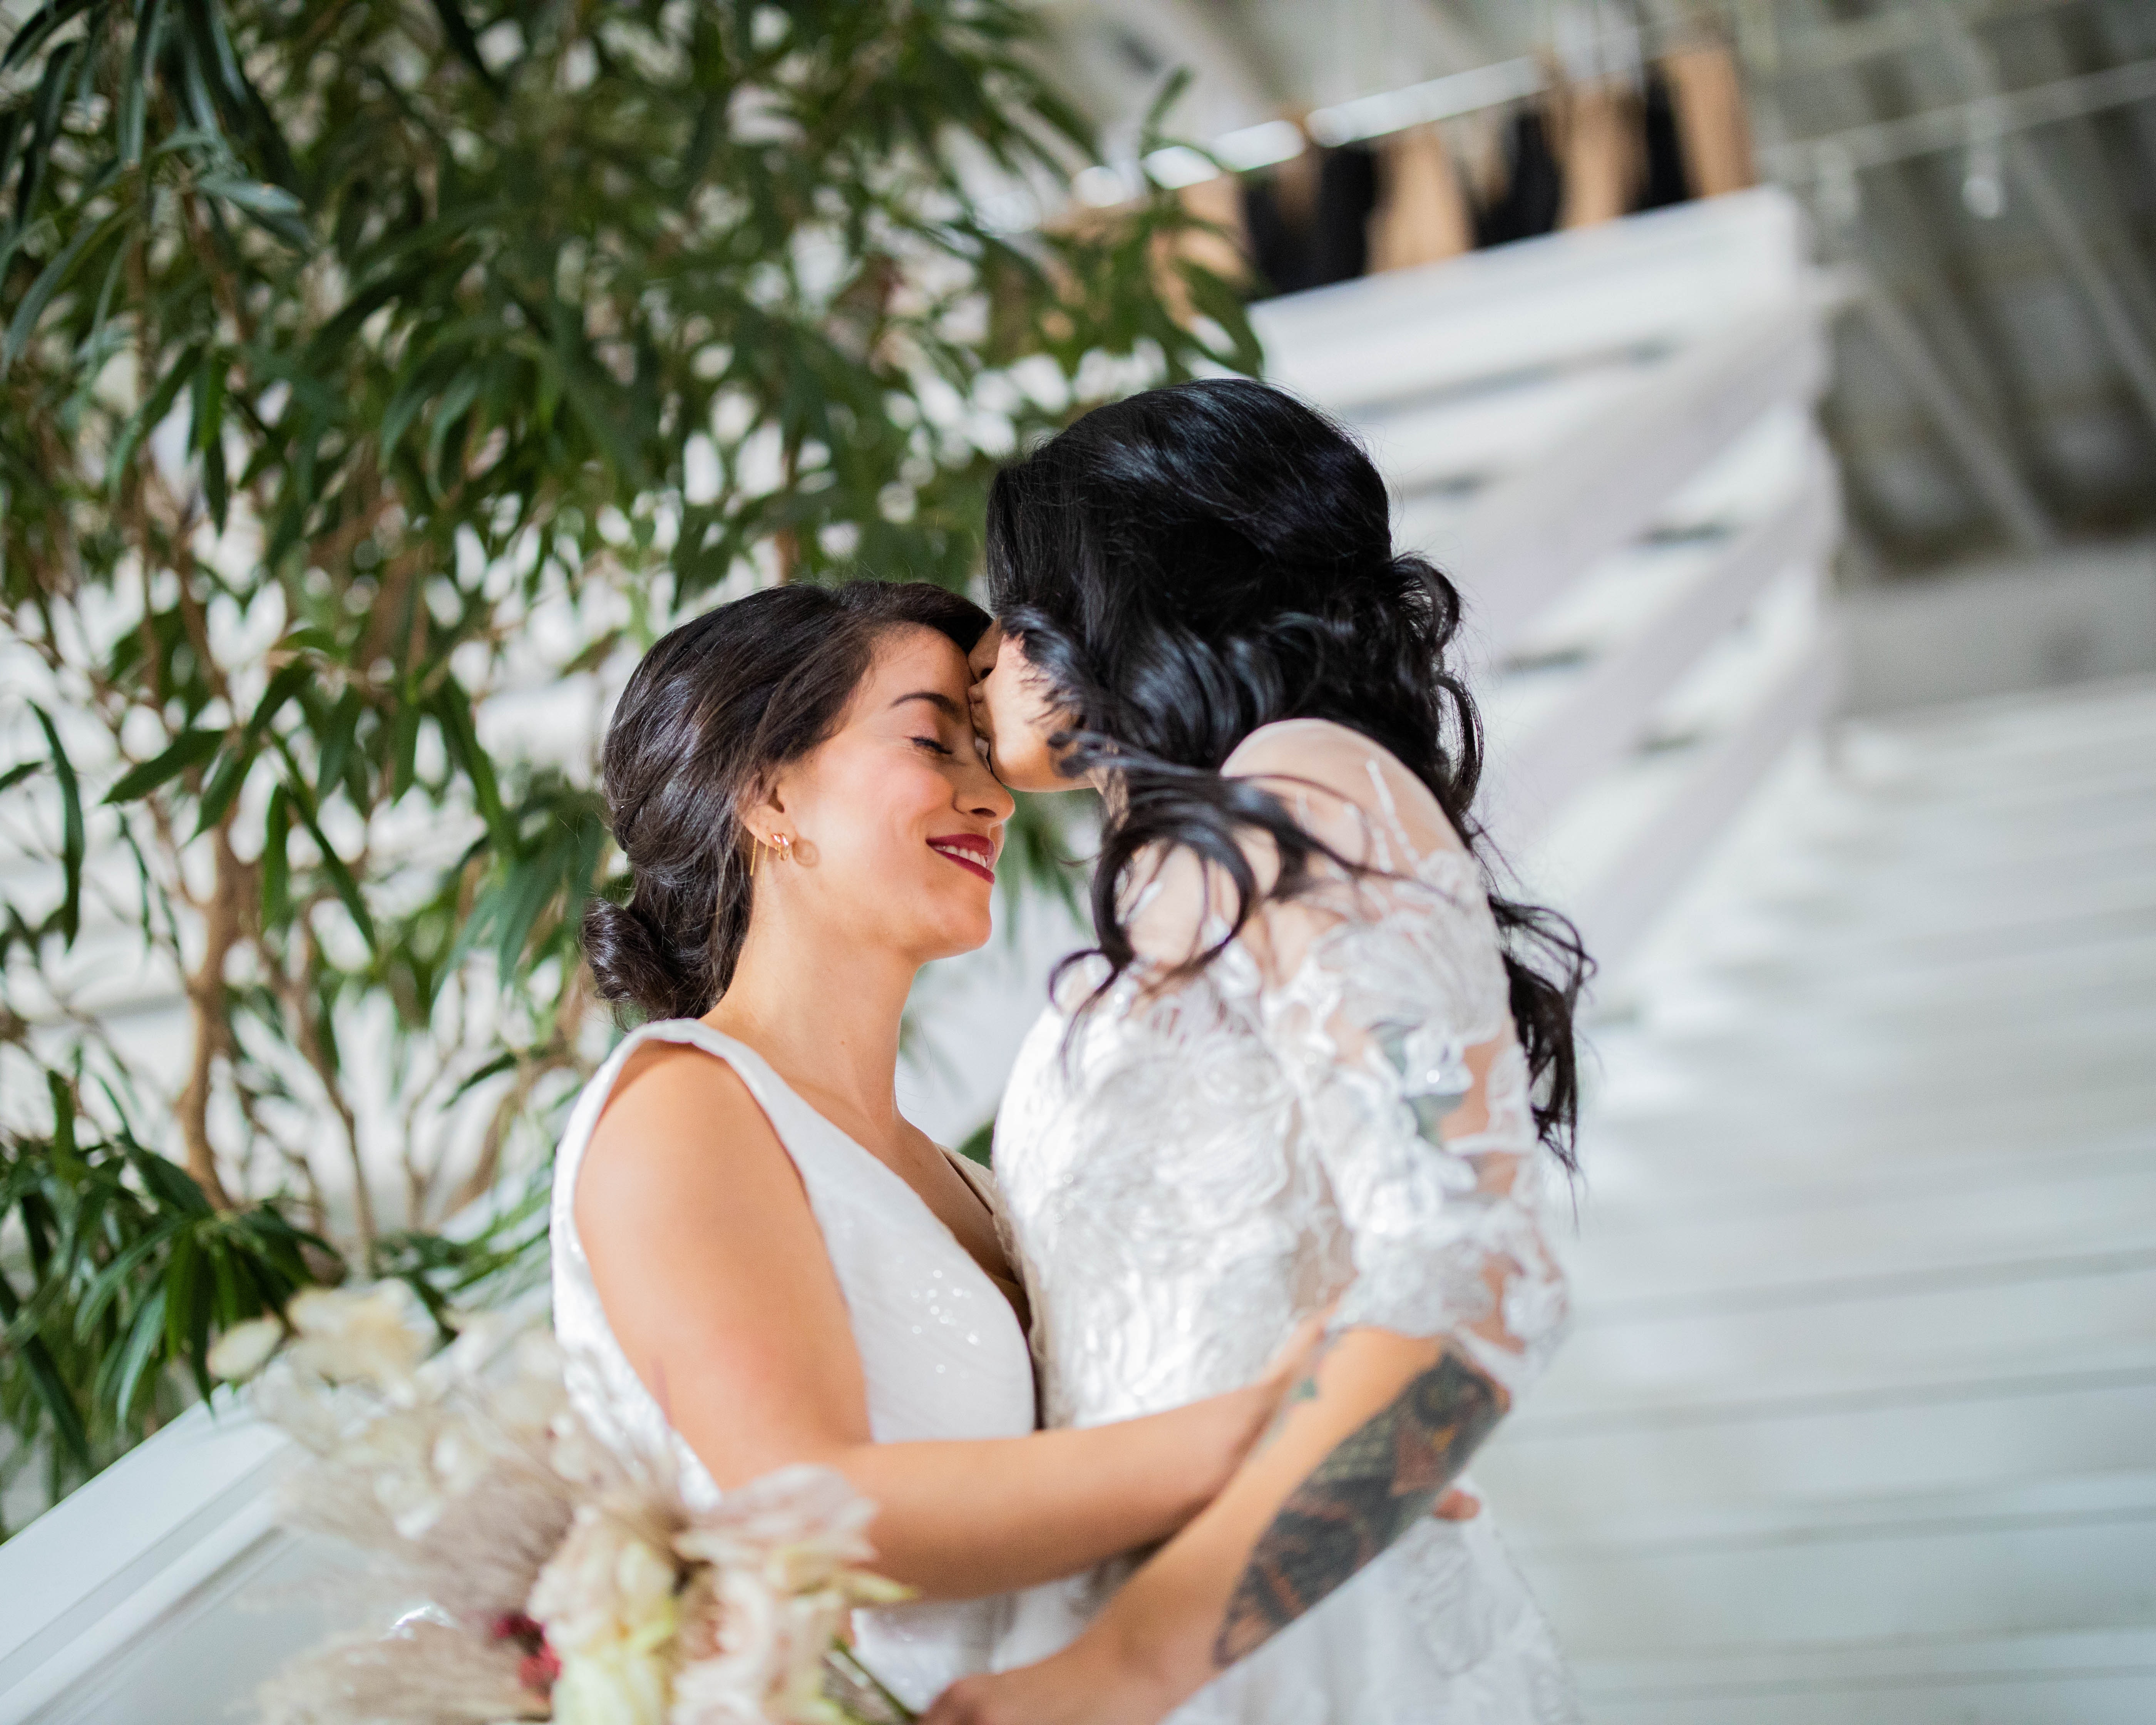 dark-haired brides embracing one another on a staircase